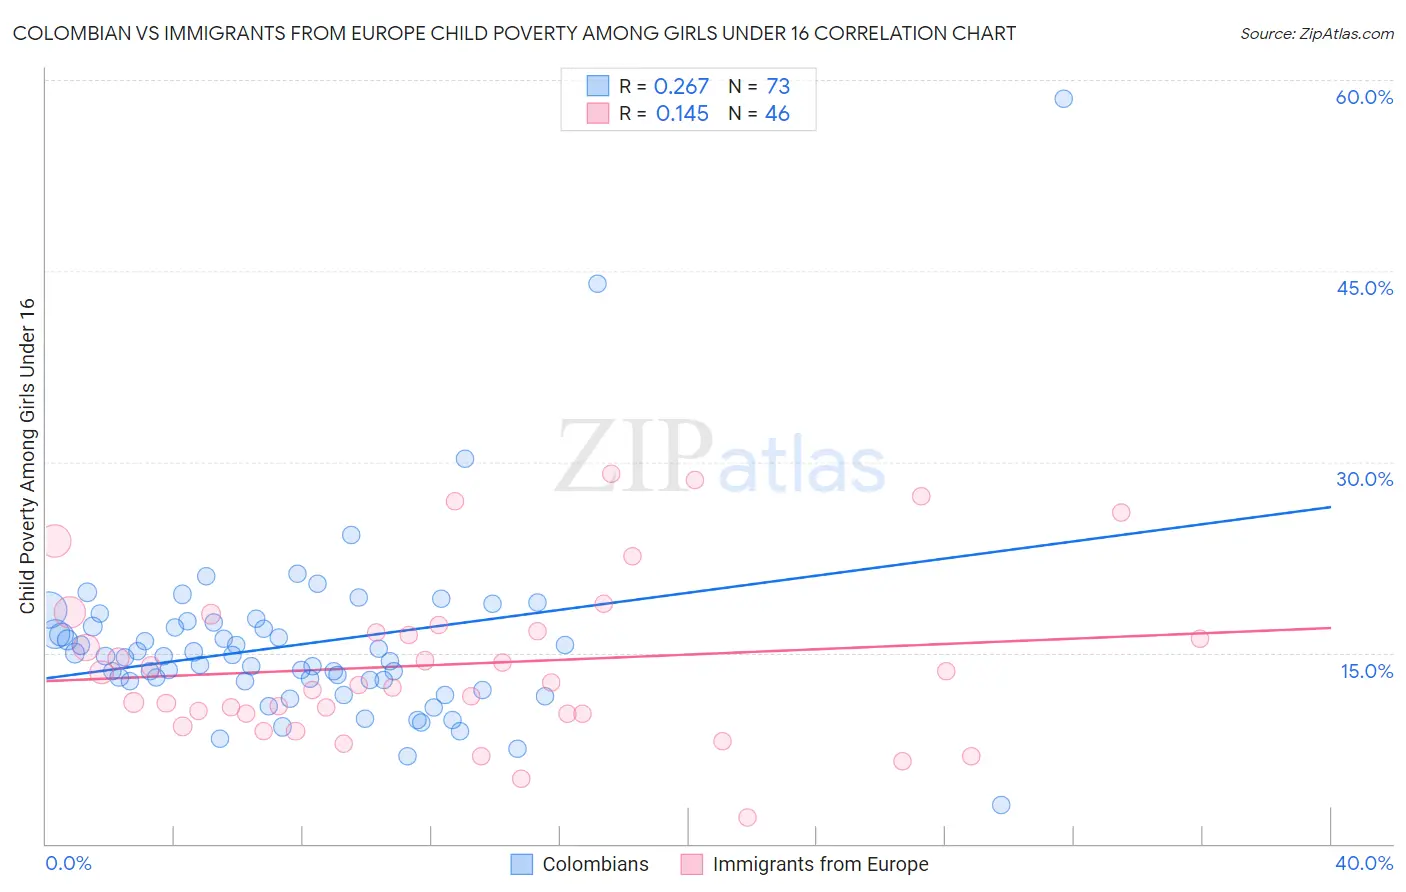 Colombian vs Immigrants from Europe Child Poverty Among Girls Under 16